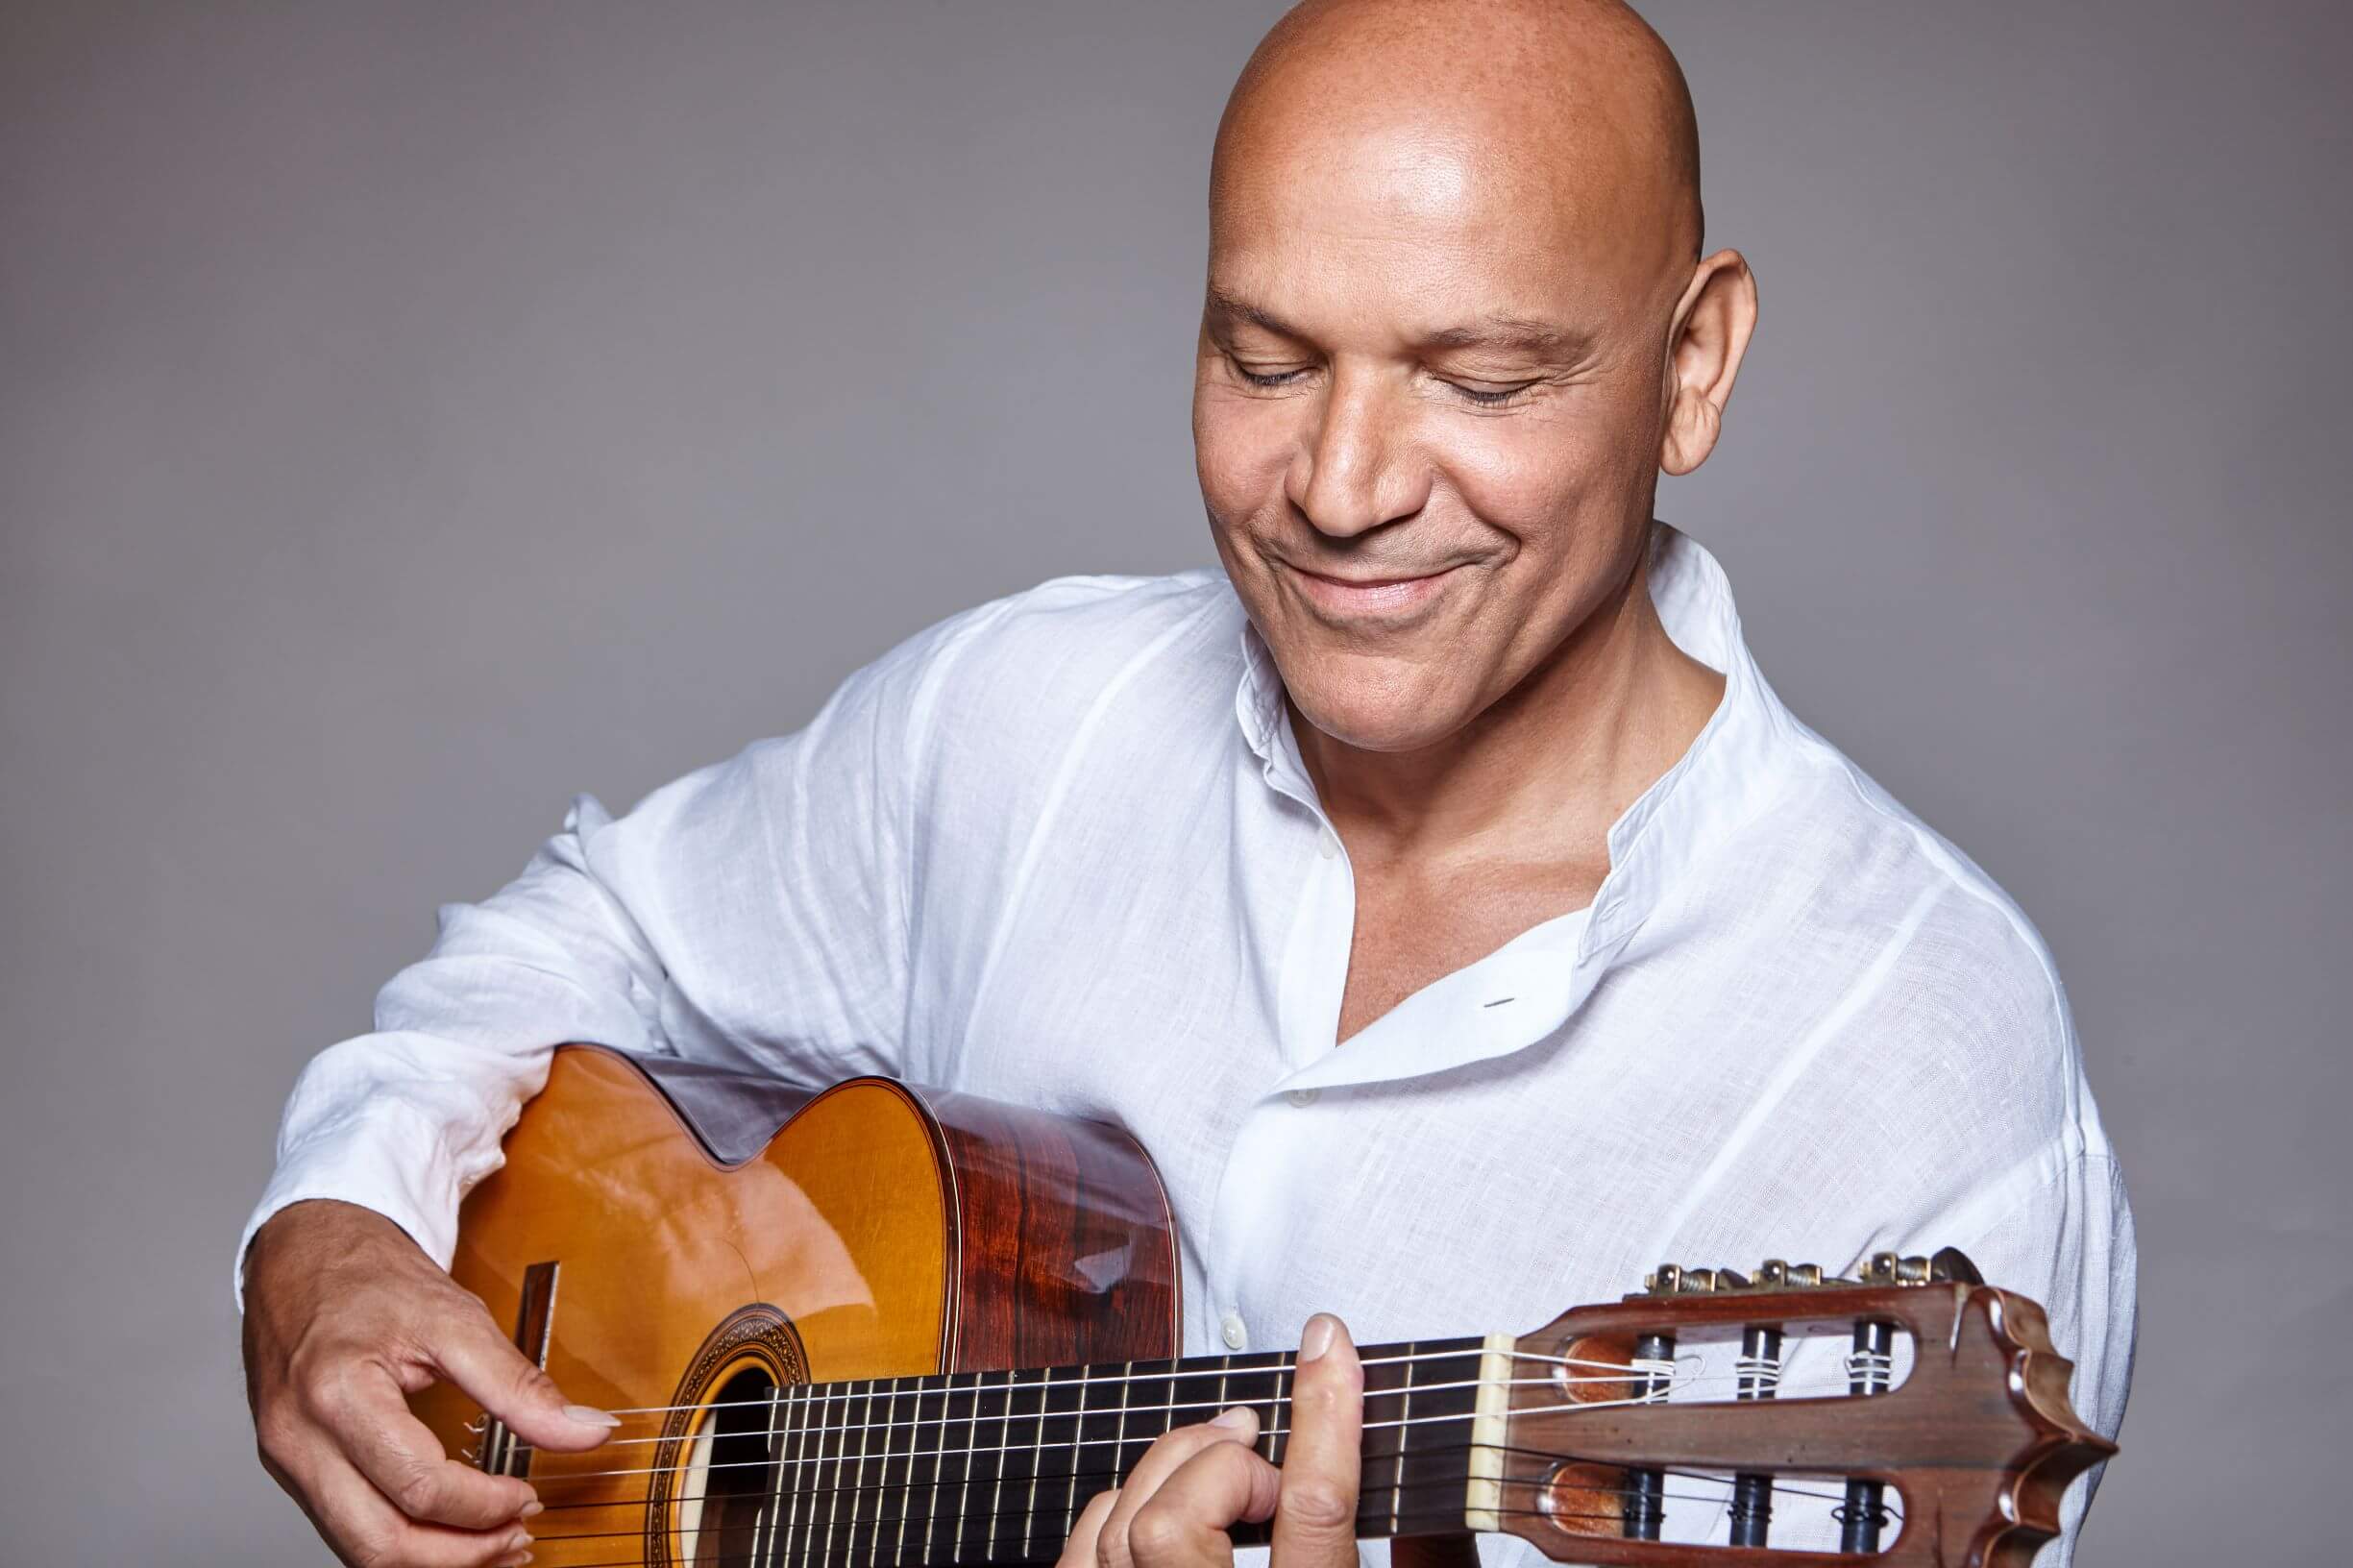 Gerard Edery featured artist in Jewish Music Masterclass. master of music of Sephardic diaspora, sponsored by Lowell Milken Center for Music of American Jewish Experience